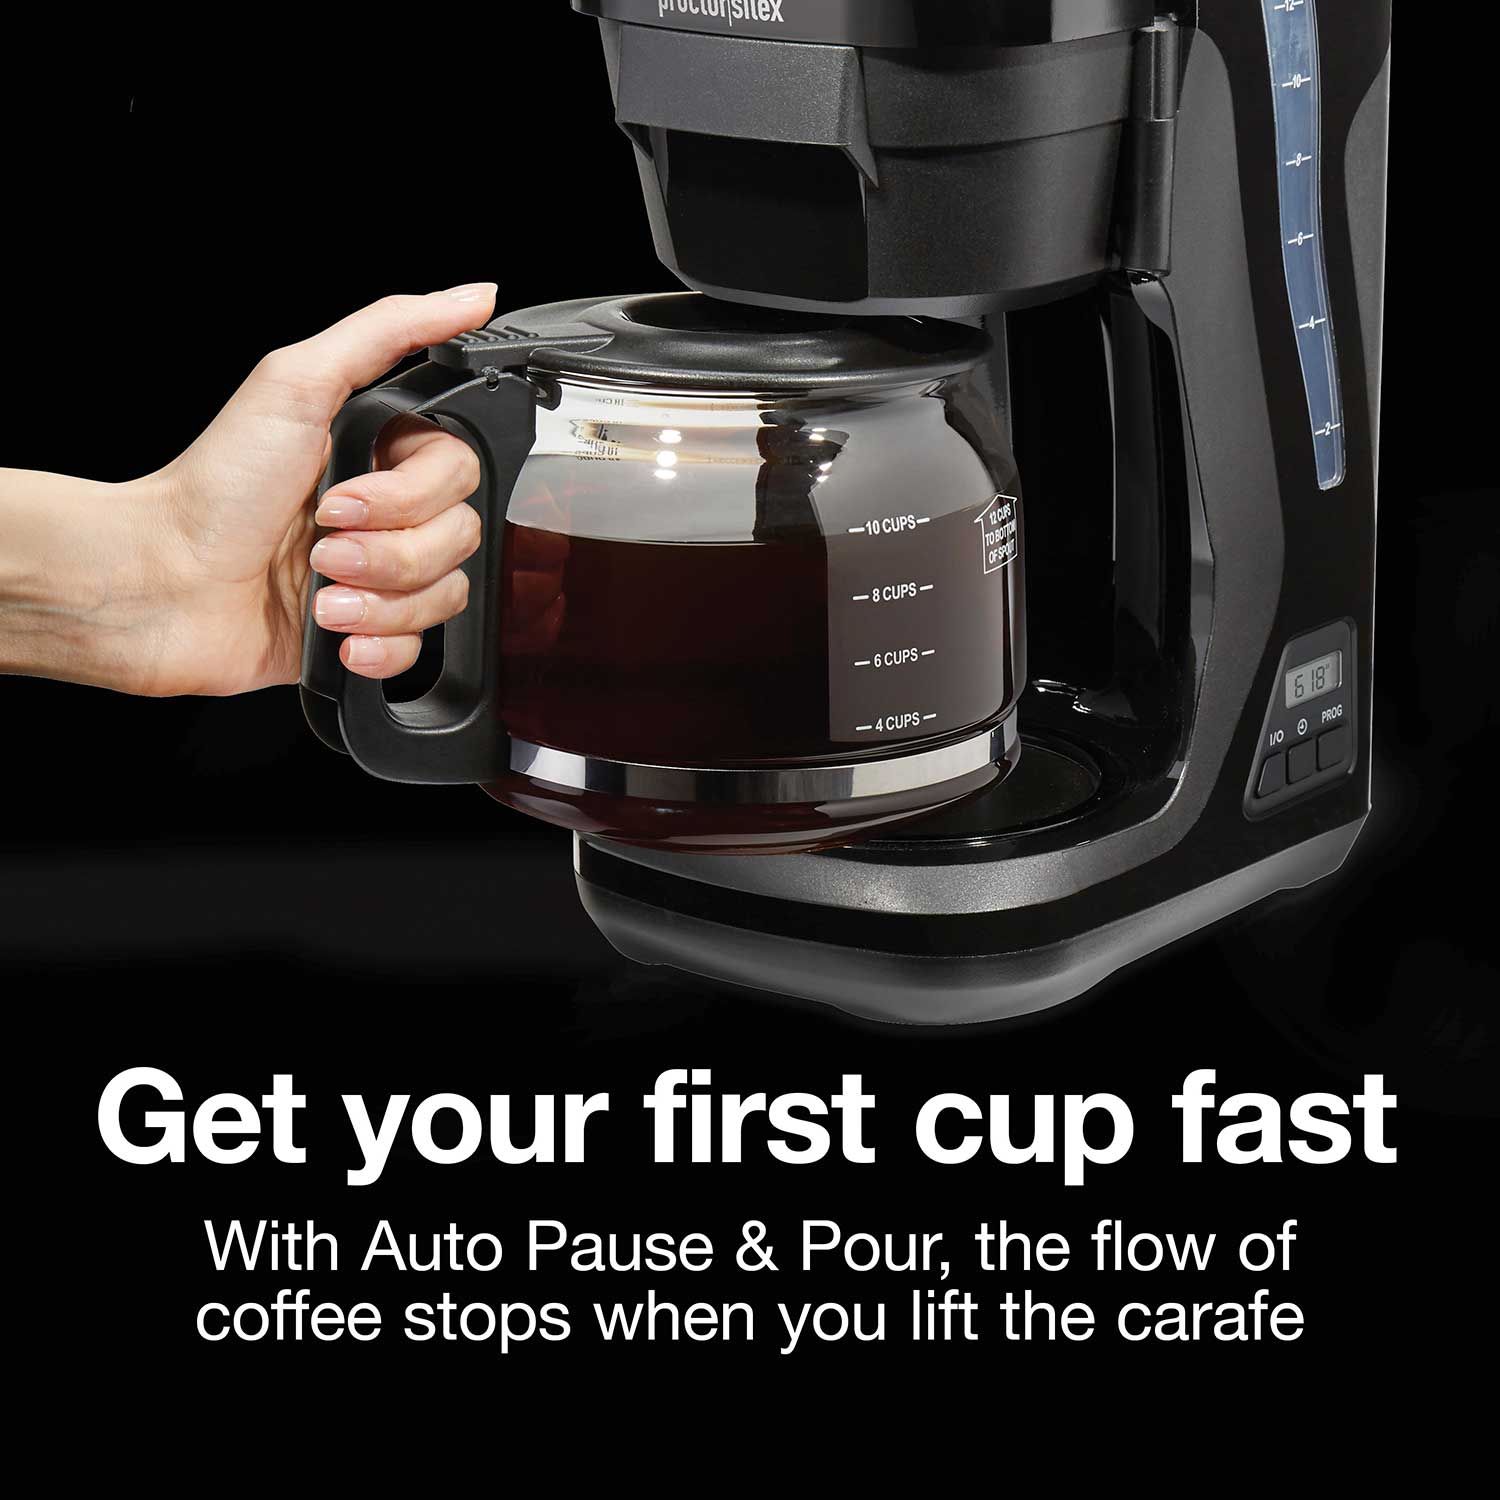  Mr. Coffee Coffee Maker, Programmable Coffee Machine with Auto  Pause and Glass Carafe, 5 Cups, Black: Home & Kitchen